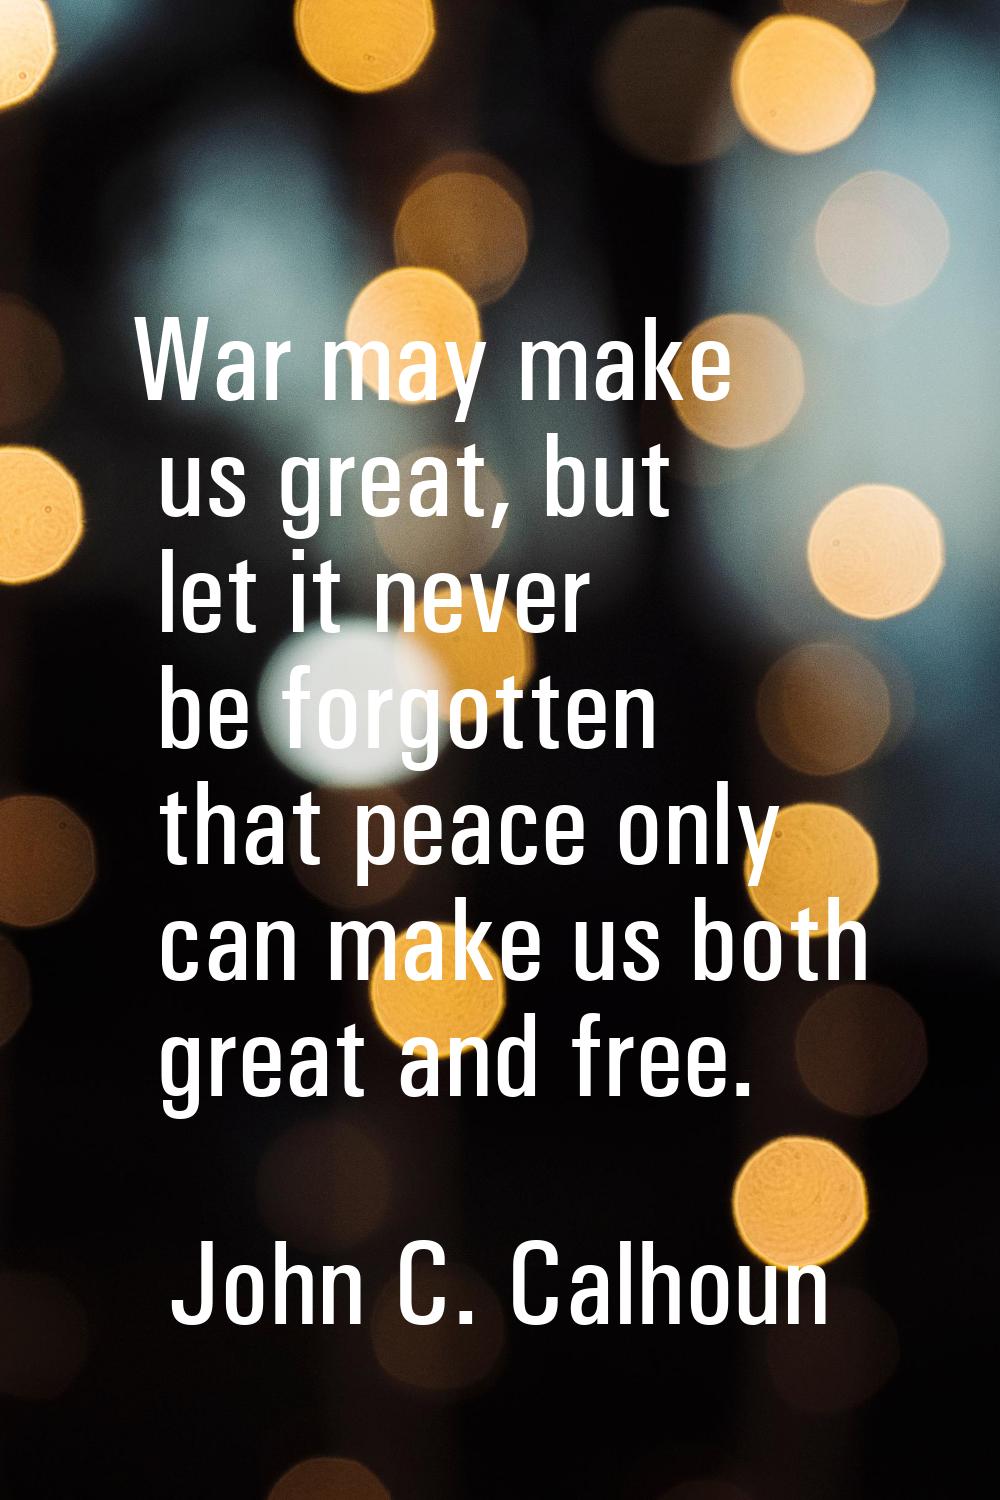 War may make us great, but let it never be forgotten that peace only can make us both great and fre